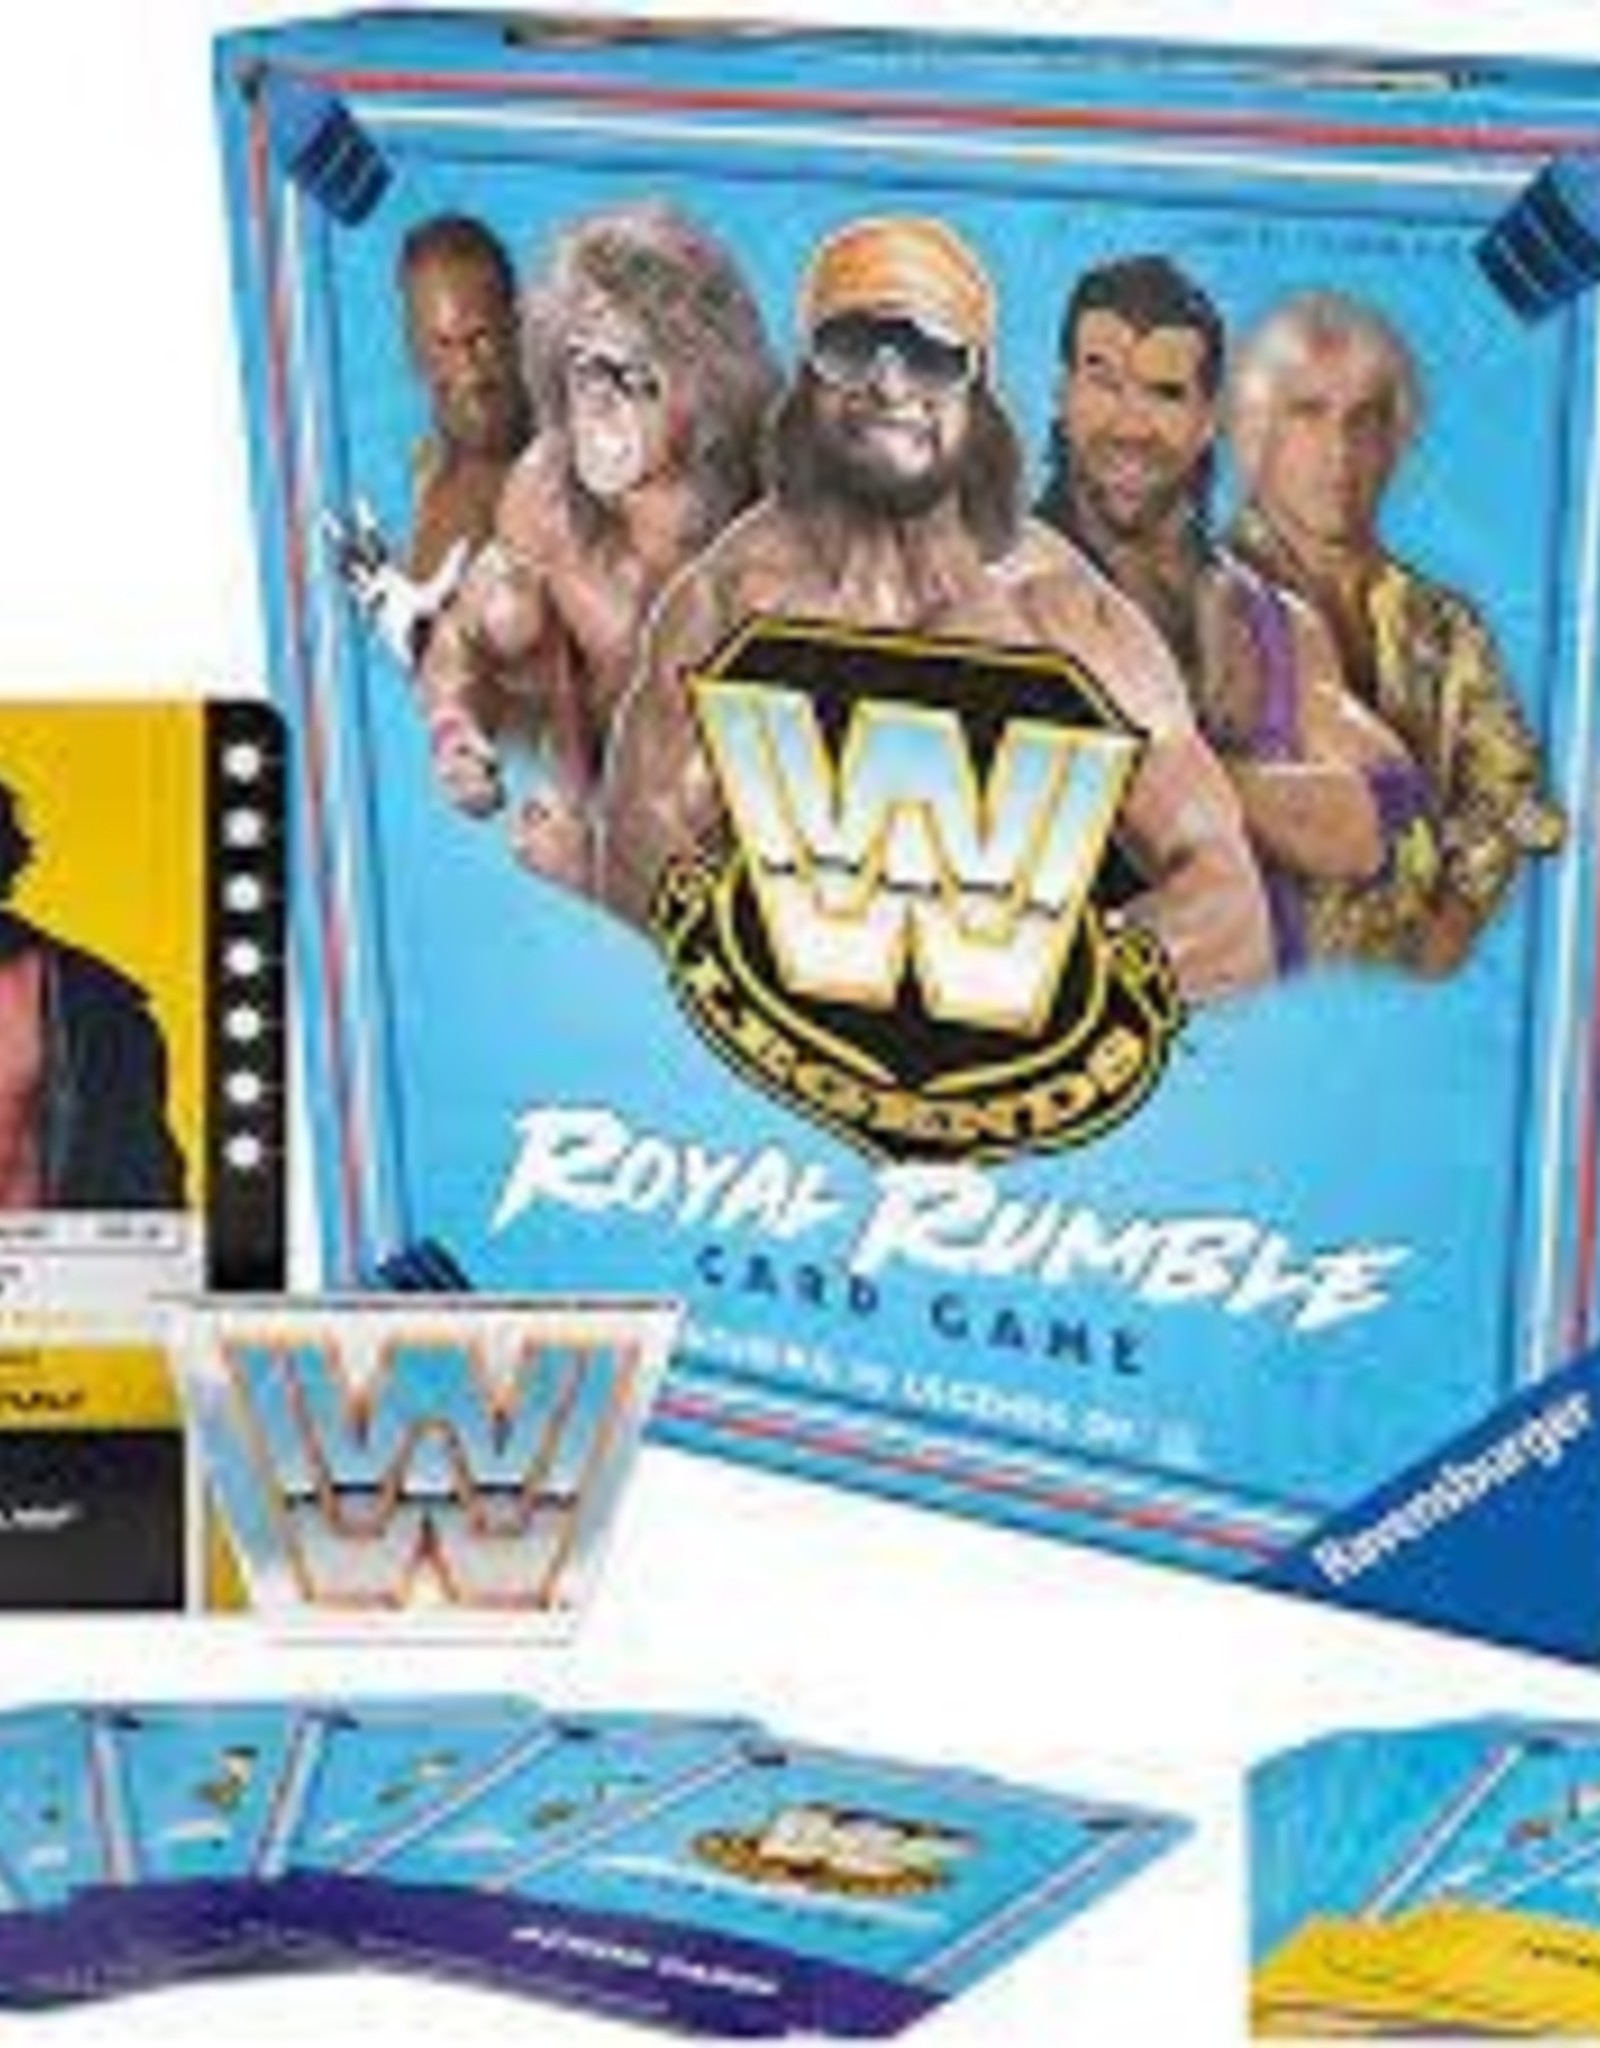 Ravensburger WWE - Ready to Rumble